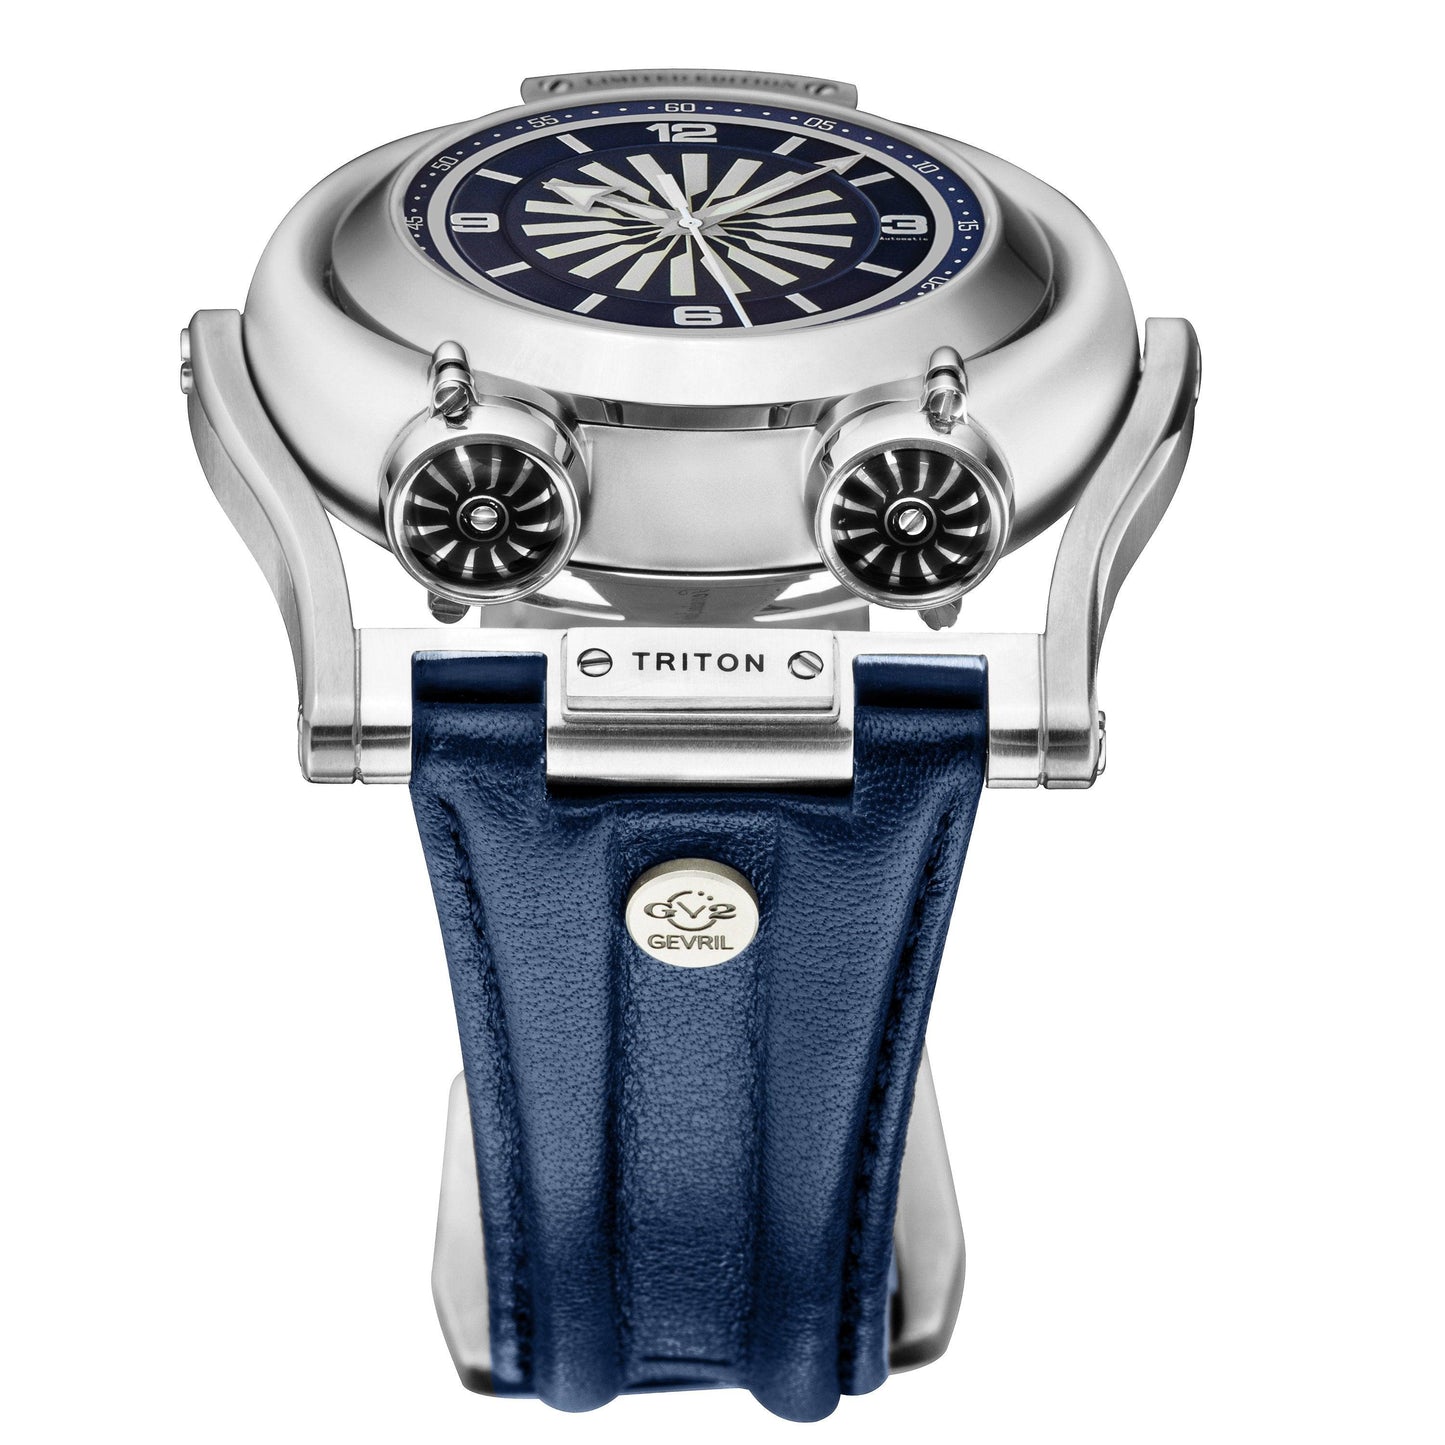 Gevril-Luxury-Swiss-Watches-GV2 Triton Automatic - Limited Edition-3407